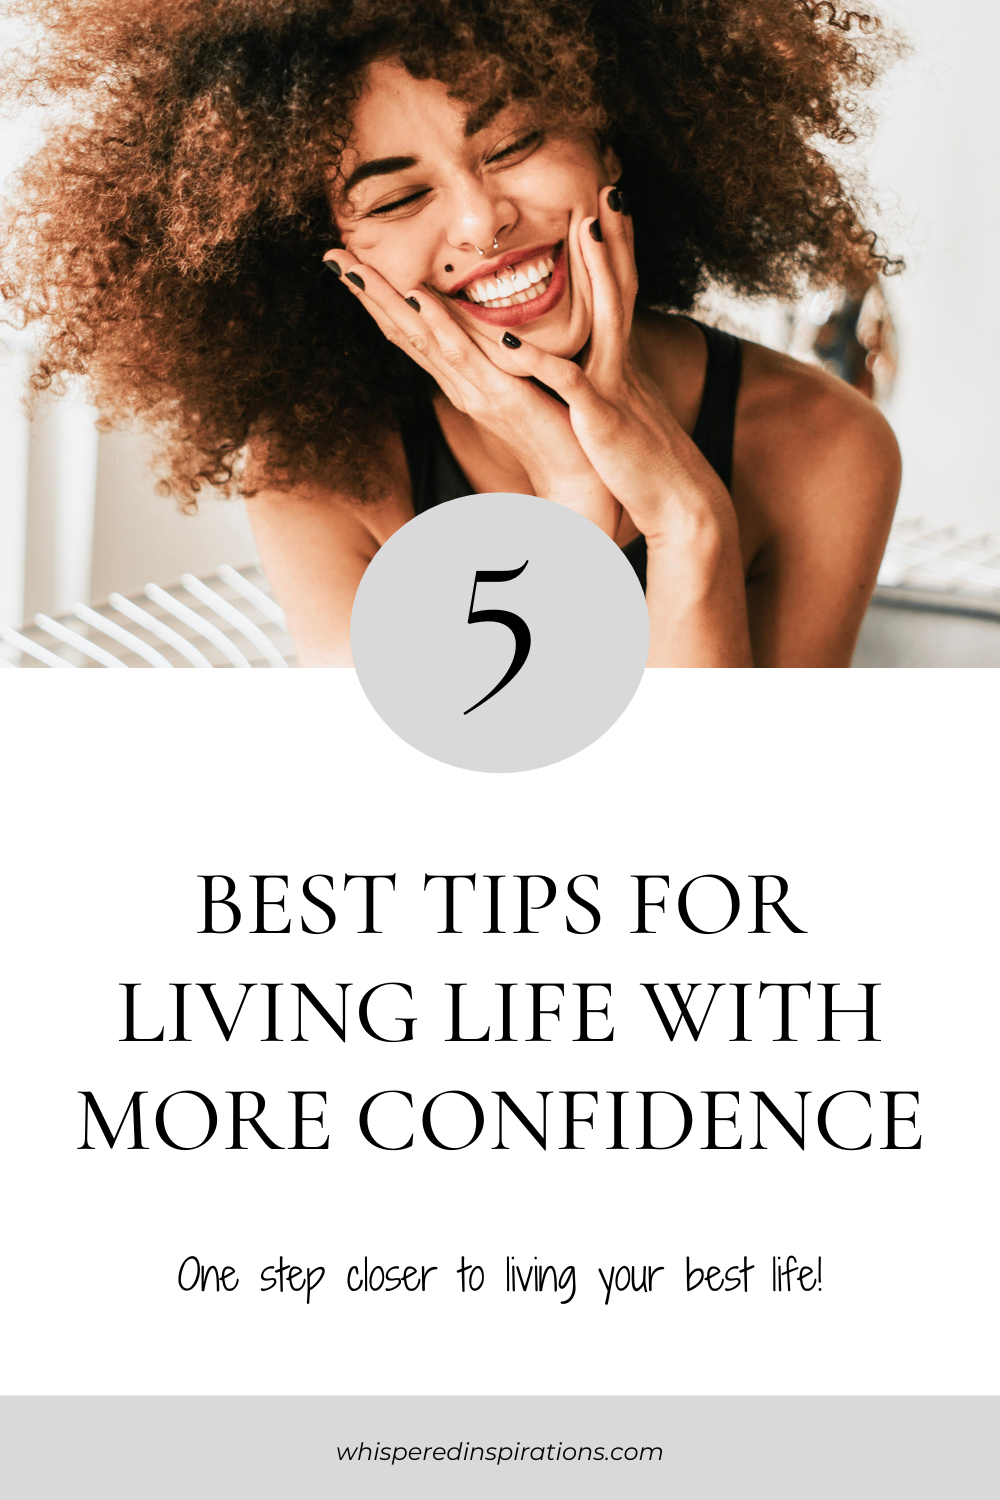 Woman holds her face and smiles, she looks confident, and carefree. This article covers the best tips for living life with more confidence.